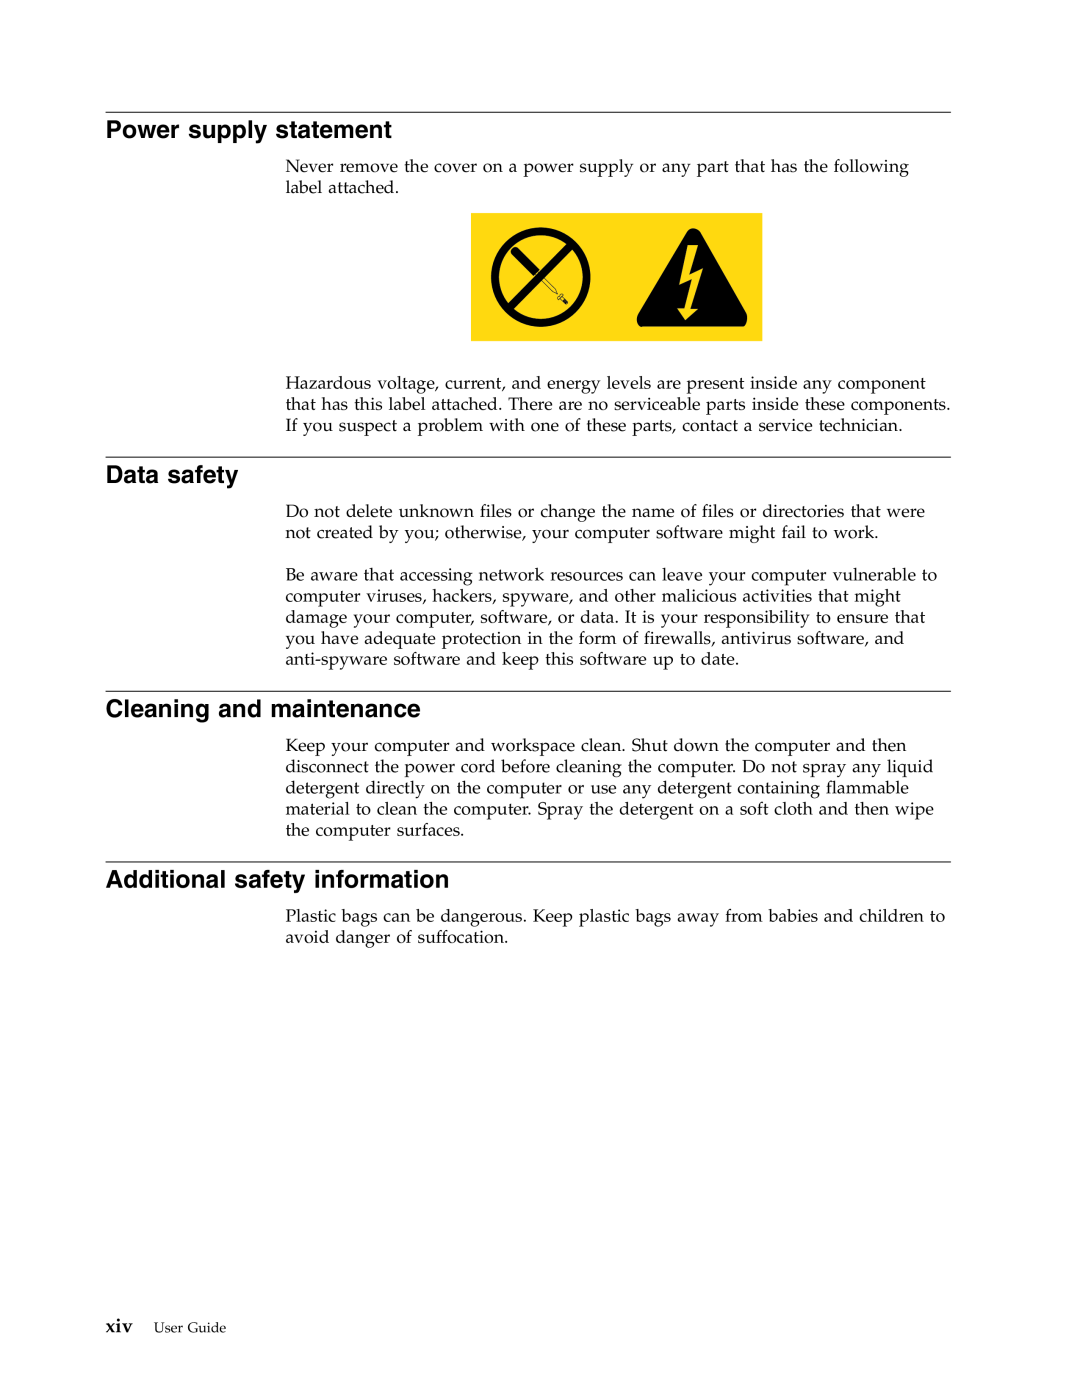 Lenovo 7396 Power supply statement, Data safety, Cleaning and maintenance, Additional safety information, xivUser Guide 